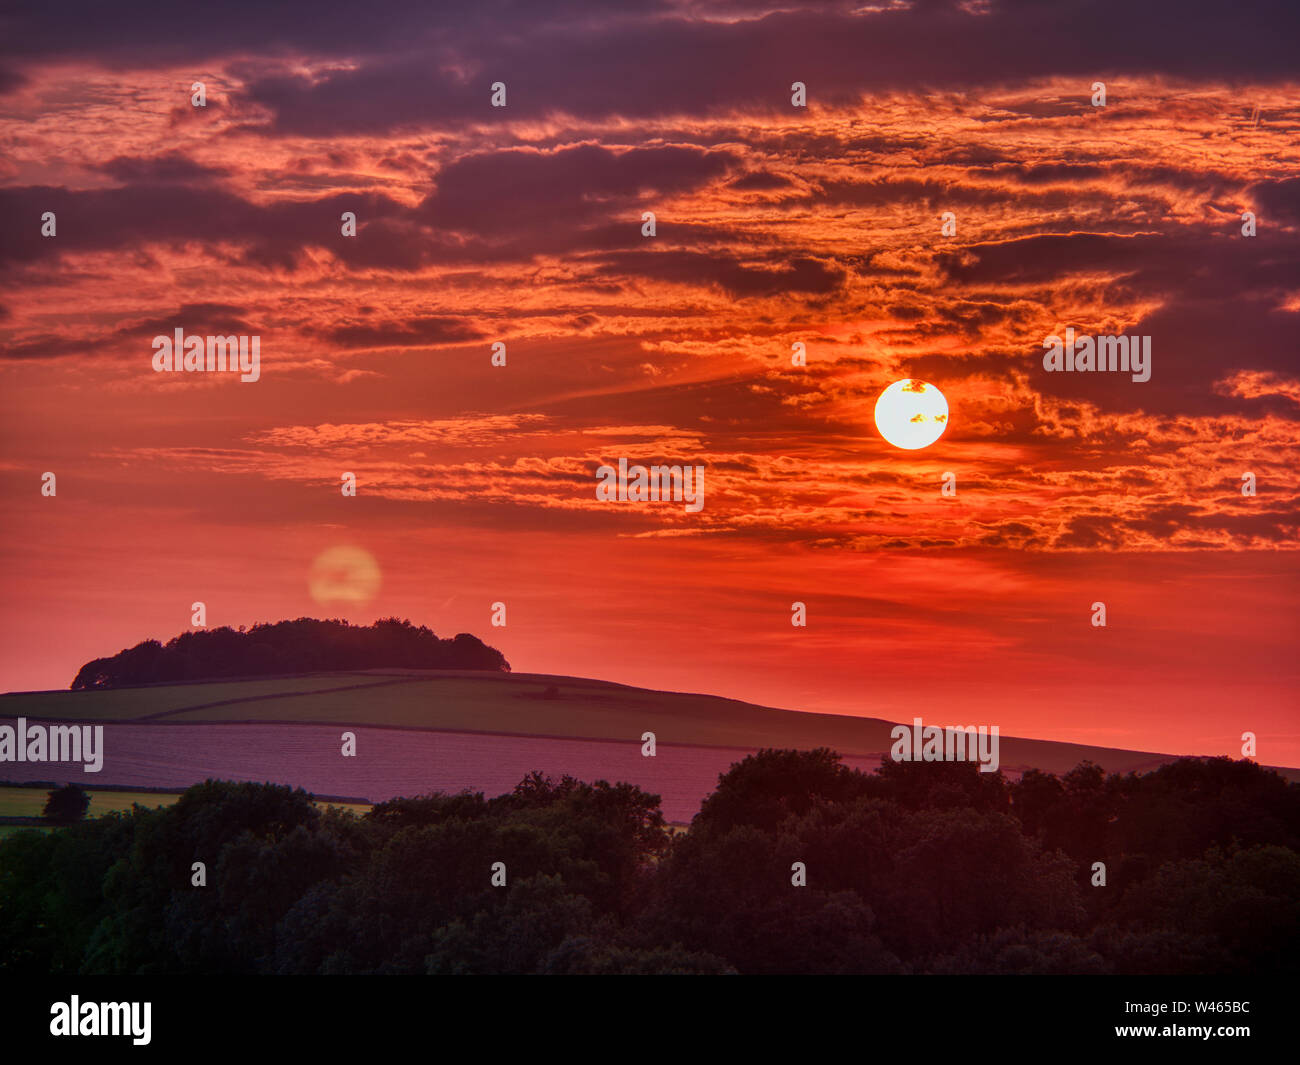 Weather UK: strange hazy red sunset over Aleck Low optical Lens distortion giving the appearance of two suns or the full buck moon refracting 180 degrees around the earth. It’s not lens flare as there is cloud over the second sun 16/07/2019, Aleck Low, shot from near Minninglow carpark, Pikehall, Peak District National Park, Derbyshire, UK Stock Photo